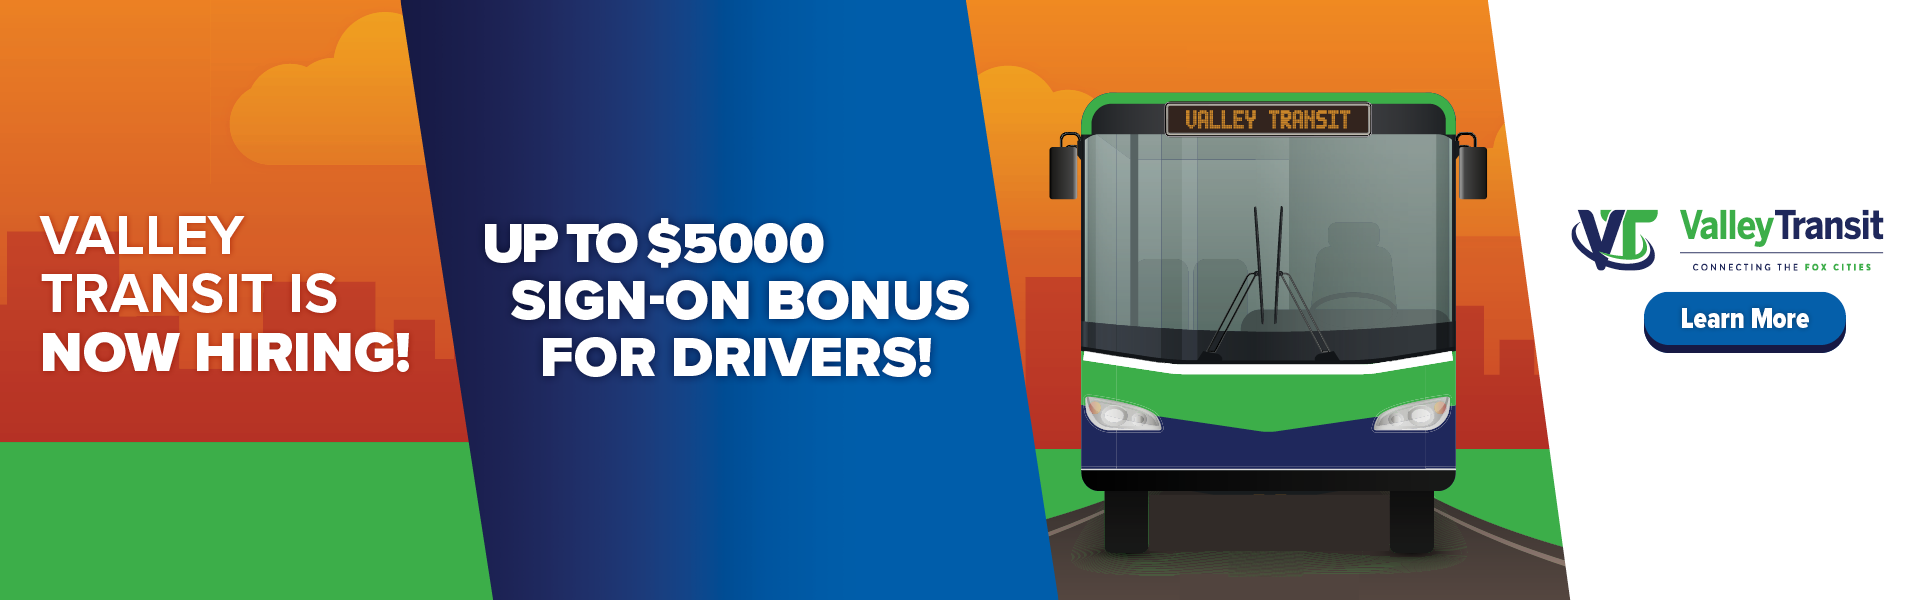 Now offering sign-on bonus for drivers